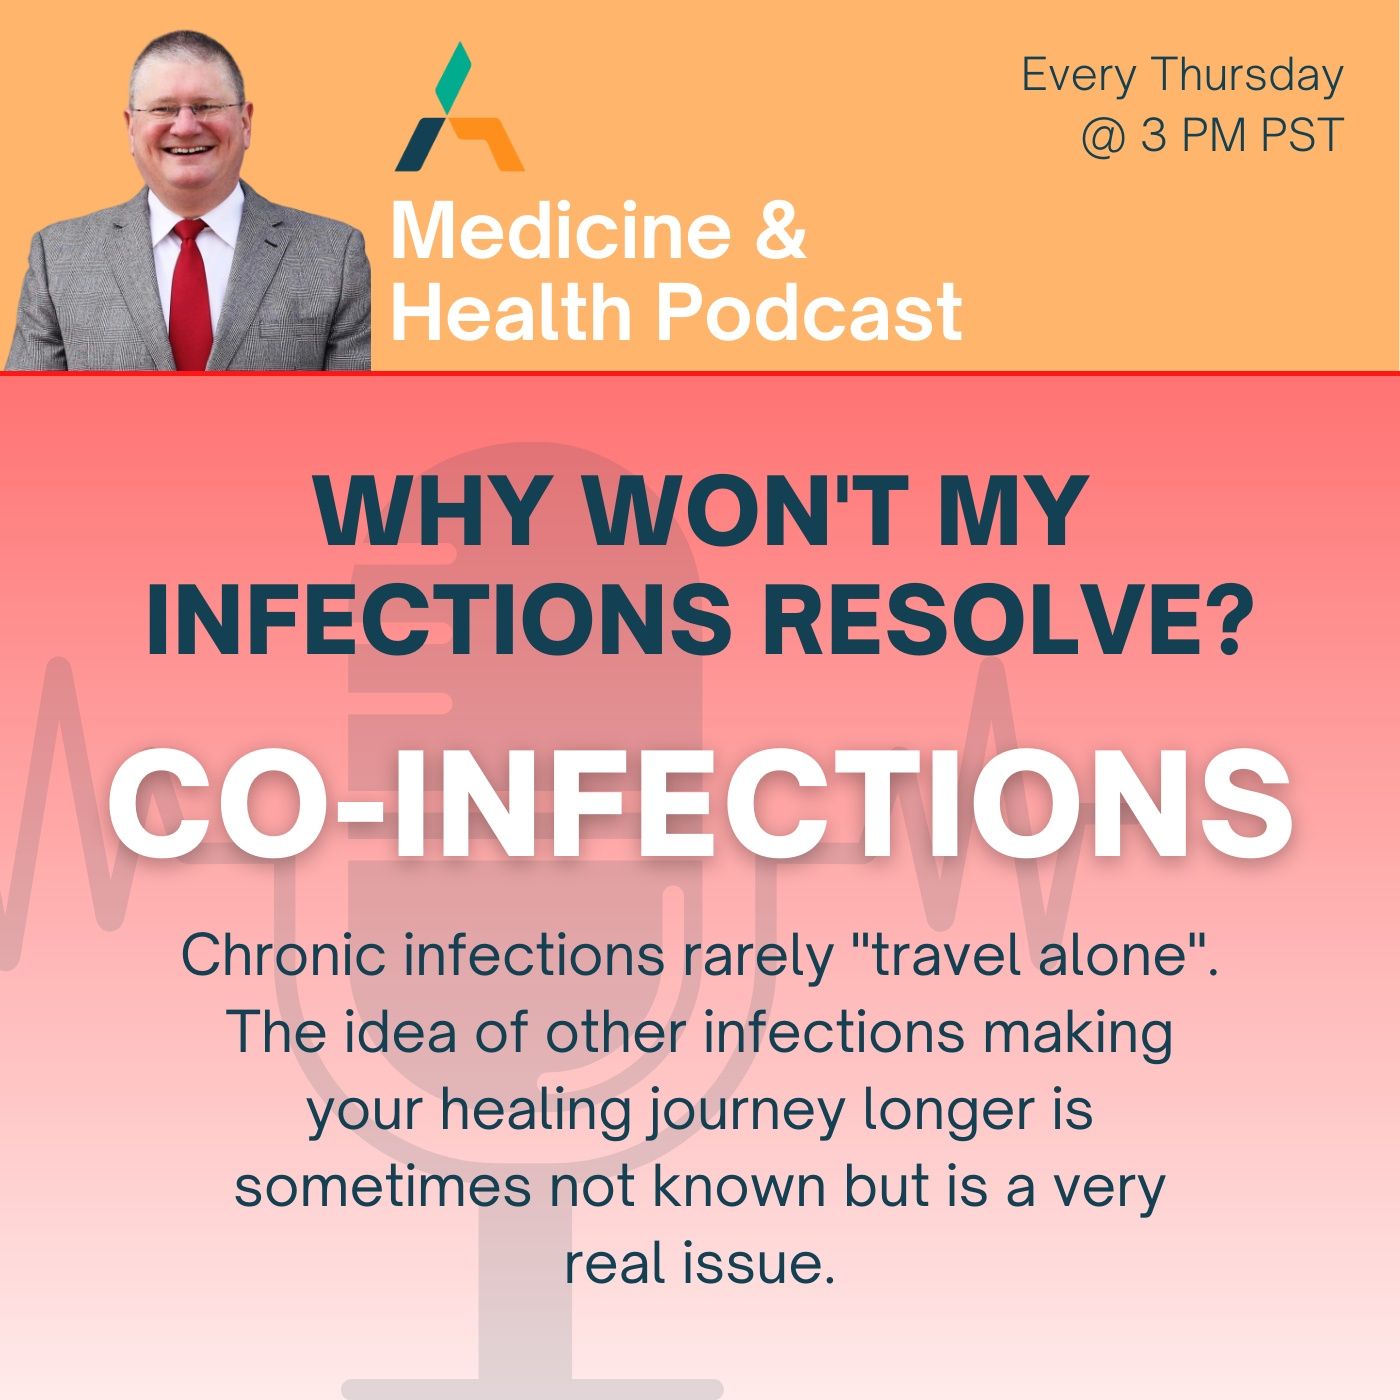 CO-INFECTIONS - Chronic infections rarely "travel alone".